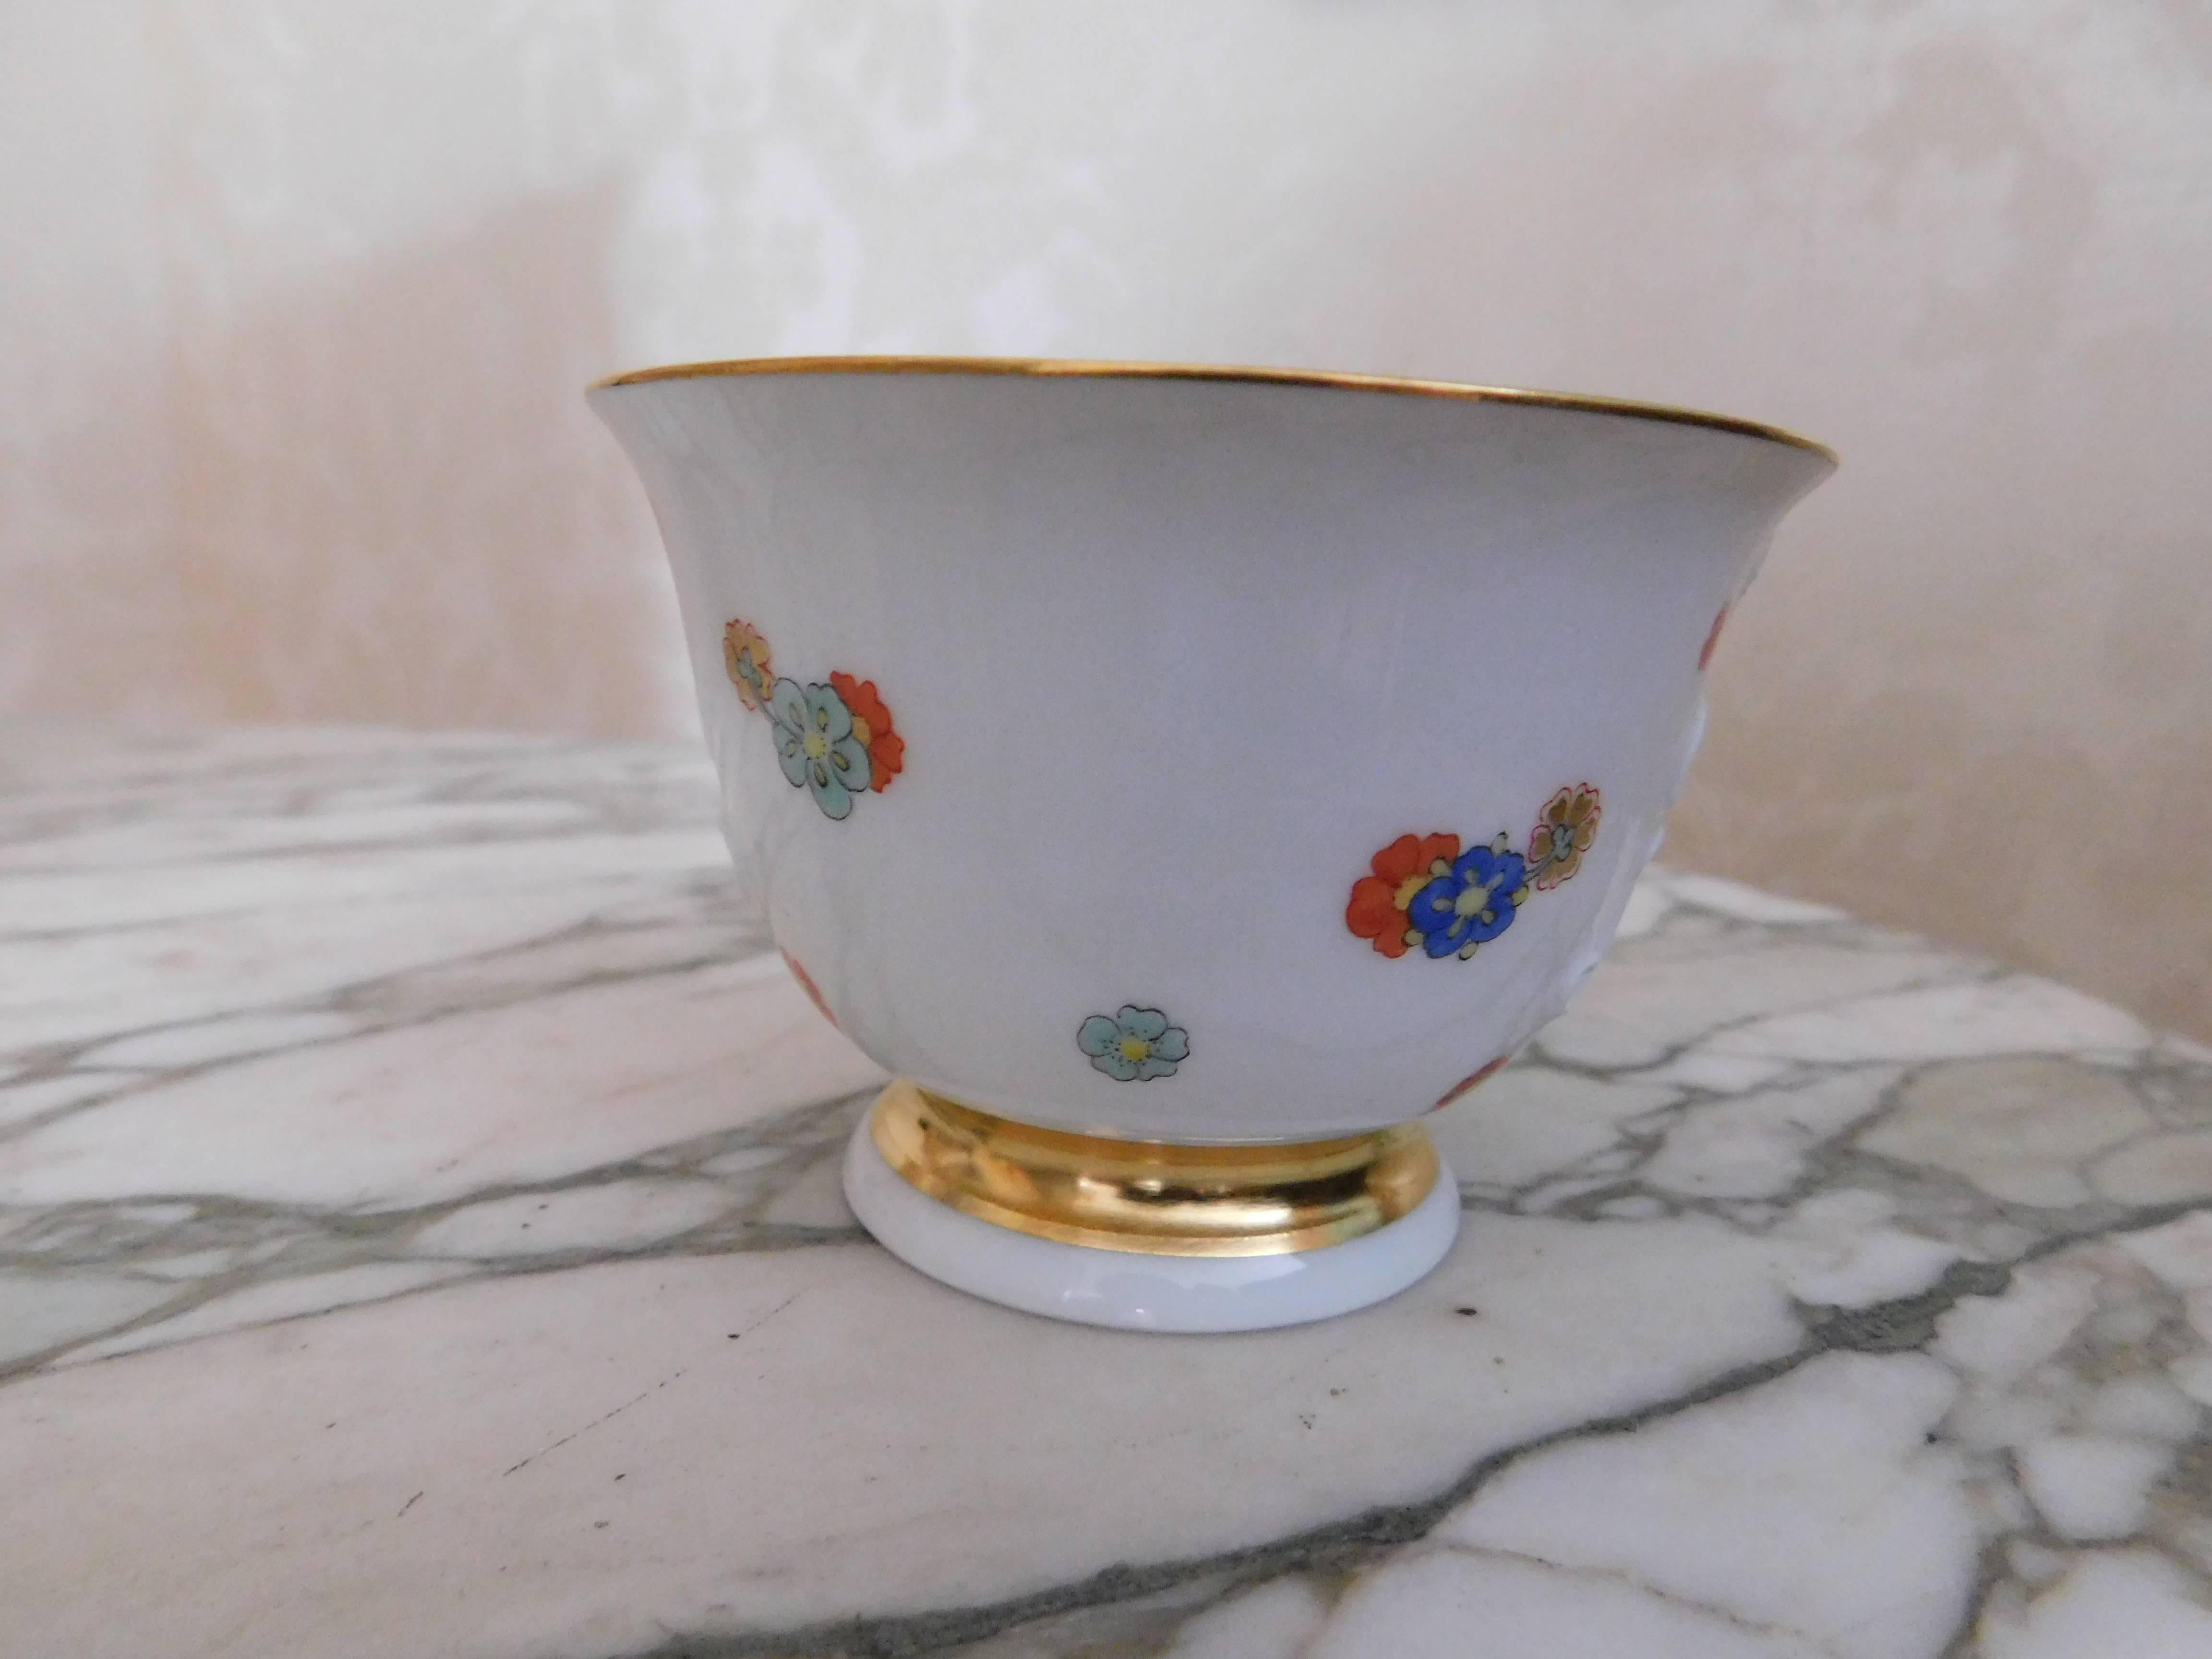 Meissen Porcelain Augustus Rex Kakiemon cup and saucer Porzellan Tasse
Beautiful white with floral design and gold gilding.
Measurements in inches:
Saucer 5.38 D x 1 H
Cup 3.25 D x 2.25 H.
 